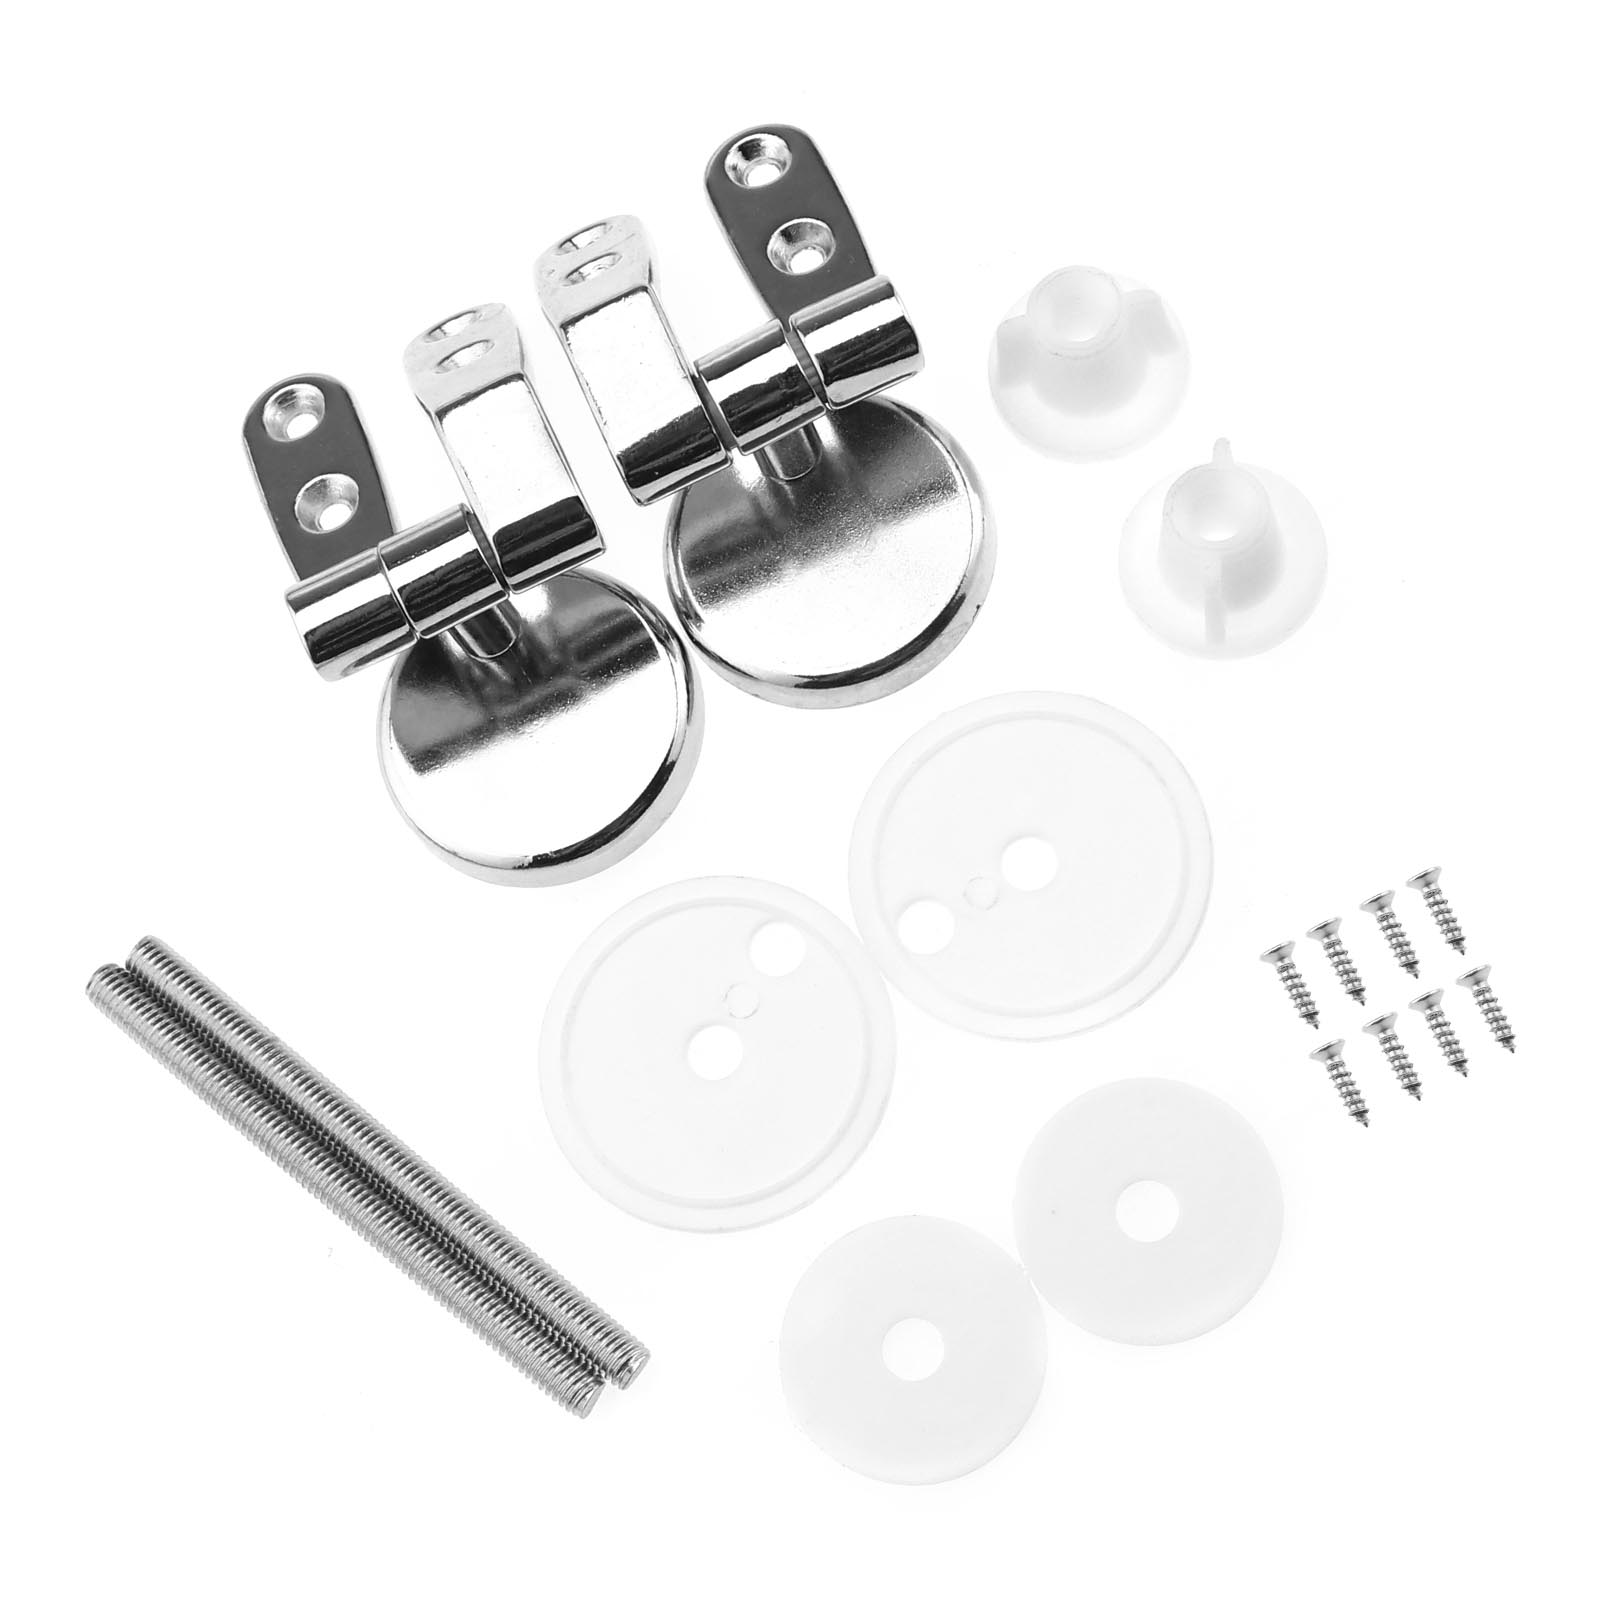 Toilet Seat Hinges And Fittings - toilet cool media